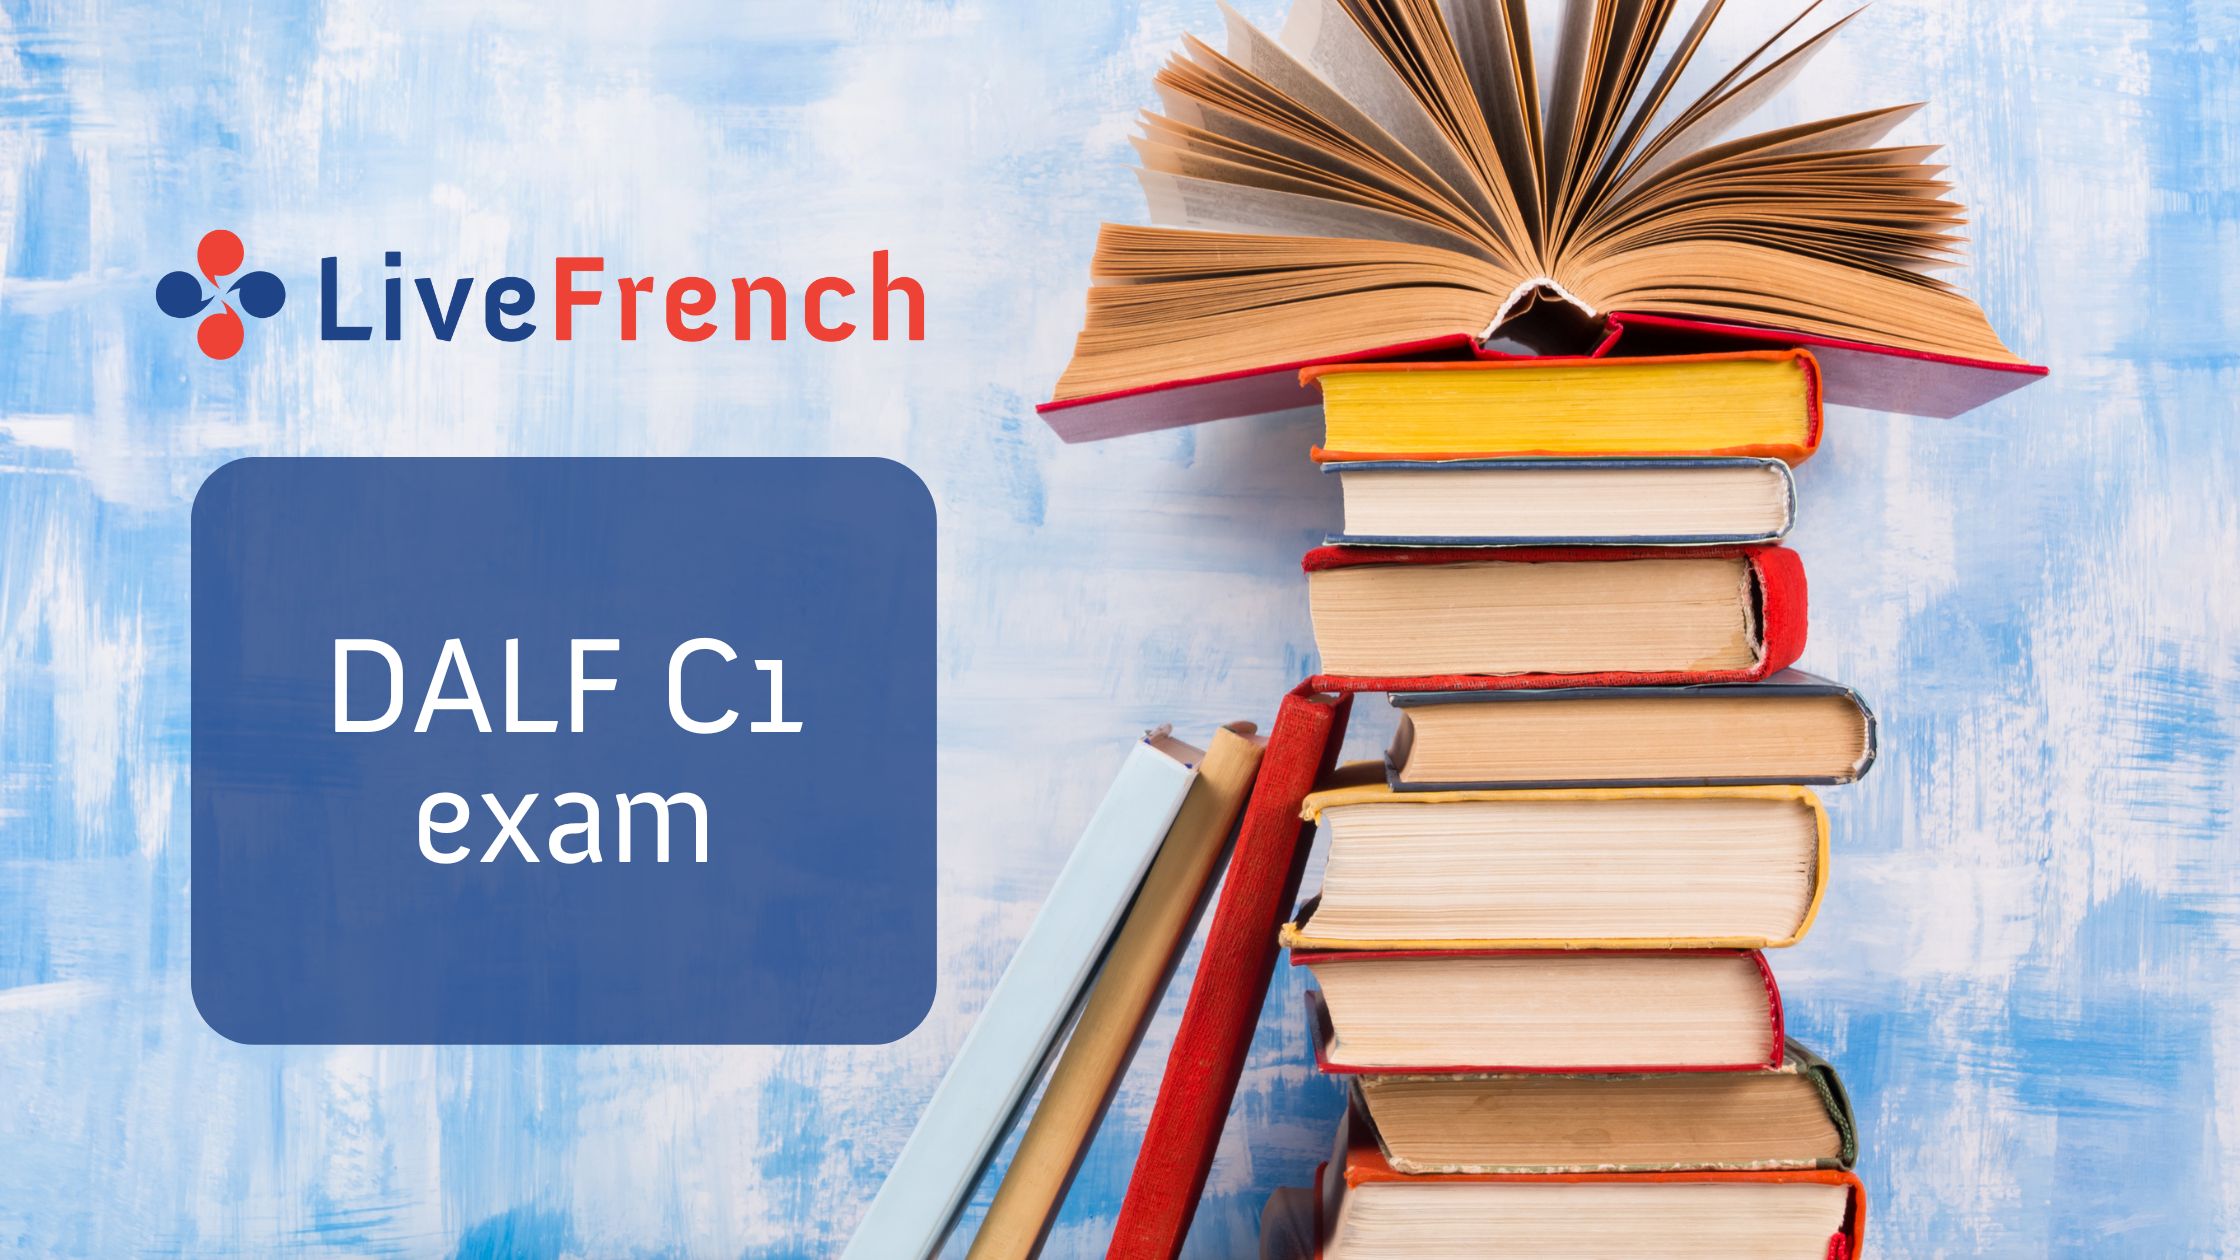 DALF C1 Exam how to prepare and succeed